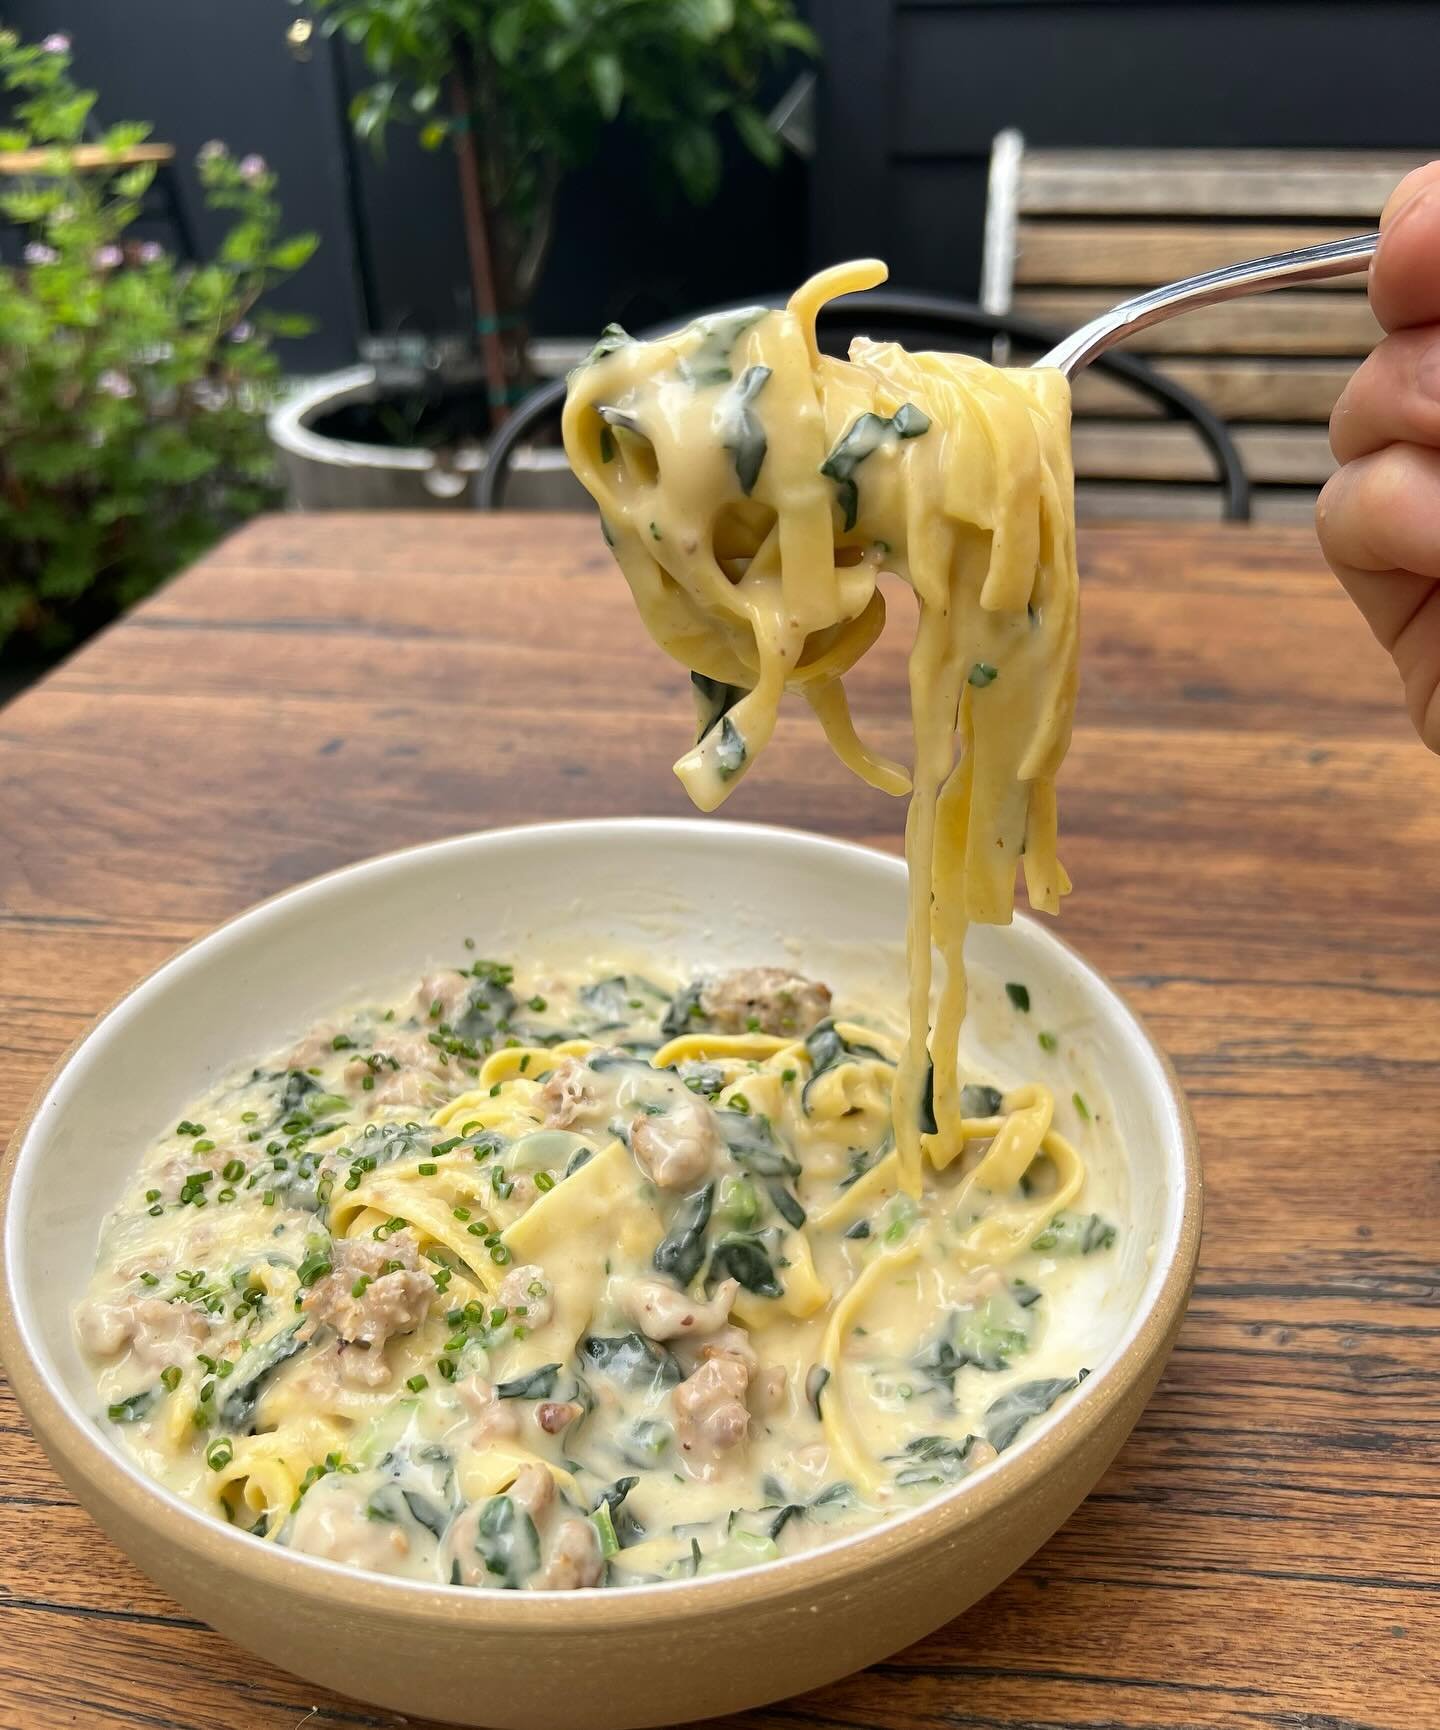 Pasta Wednesday Special! 🍝 

Fettuccine in a Creamy Parsnip Sauce with Italian Sausage, Spinach and Parmigiano Reggiano 

Tonight only! 

Our Hours: 
Mon-Thurs 3-9pm.
Fri-Sat 12-10pm.
Sun 12-9pm.

See you here. 🌙 
&bull; Reservations via yelp, link